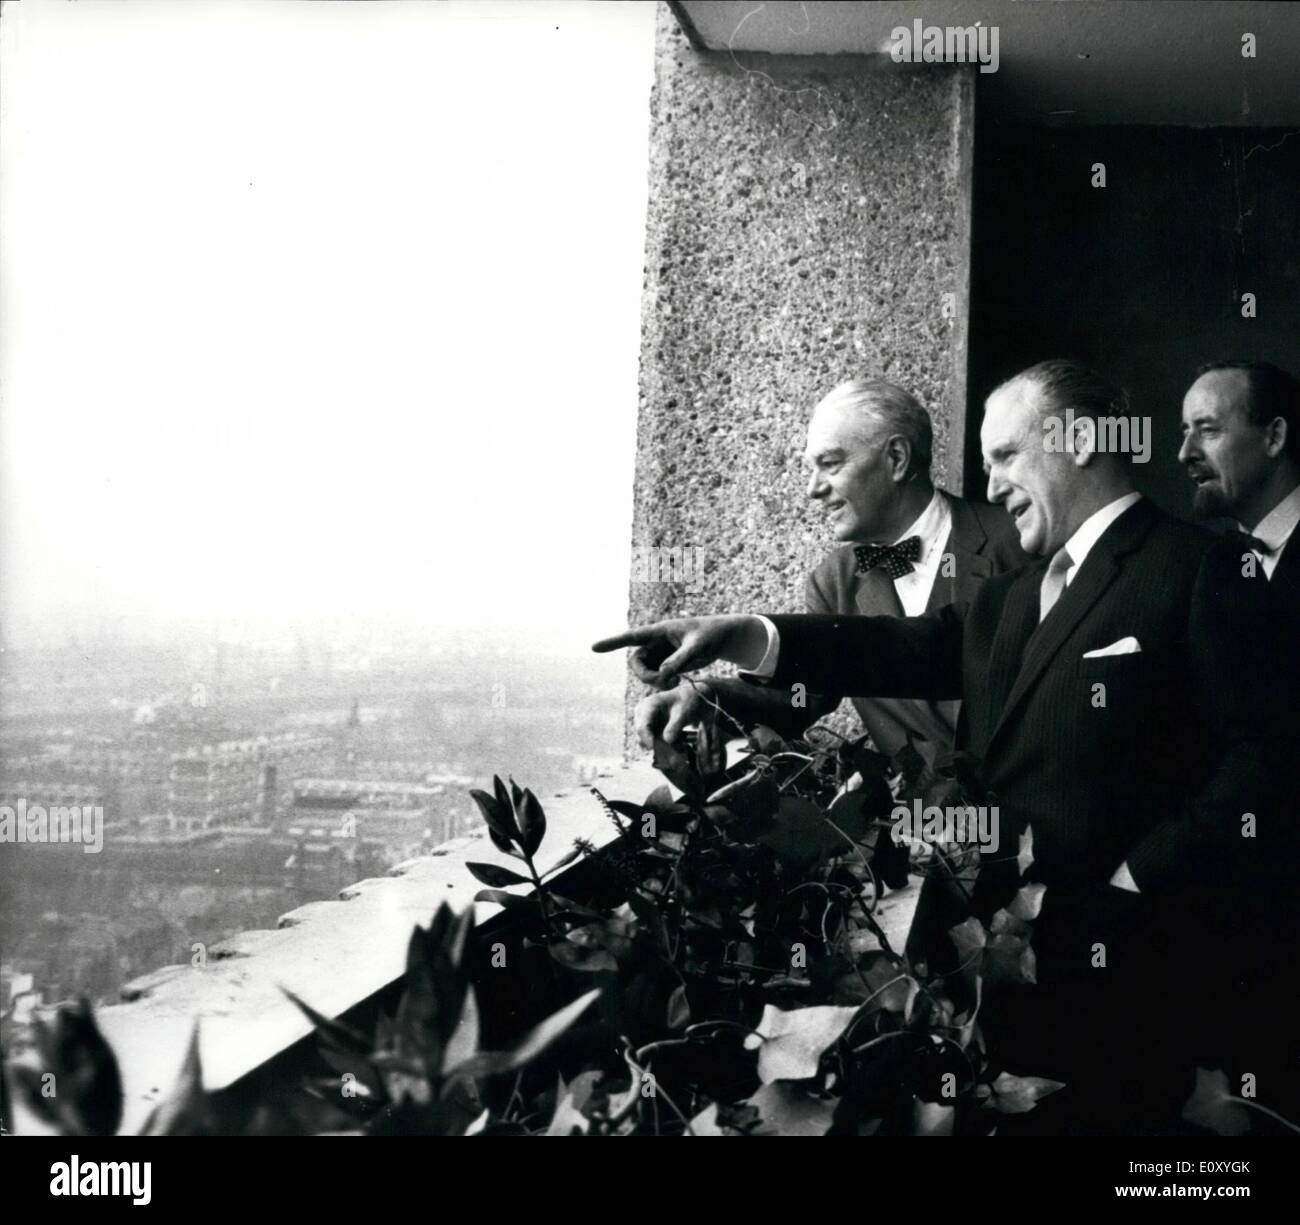 Feb. 02, 1968 - Architect who designed block of flats moves in as a Sociological Experiment.: The Leader of the Greater London Council Mr. Desmond Plummer , today opened the East End's tallest block of flats, and then called on the Council's most unusual tenant who will be living at the top of the tower. The tenant - Mr. Erno Goldfinger, the architect who designed the block has moved into one of the 26-storey flats as a sociological experiment. He will study the living conditions which he has produced for GLO tenants, and use the knowledge gained when designing further homes. Said Mr Stock Photo